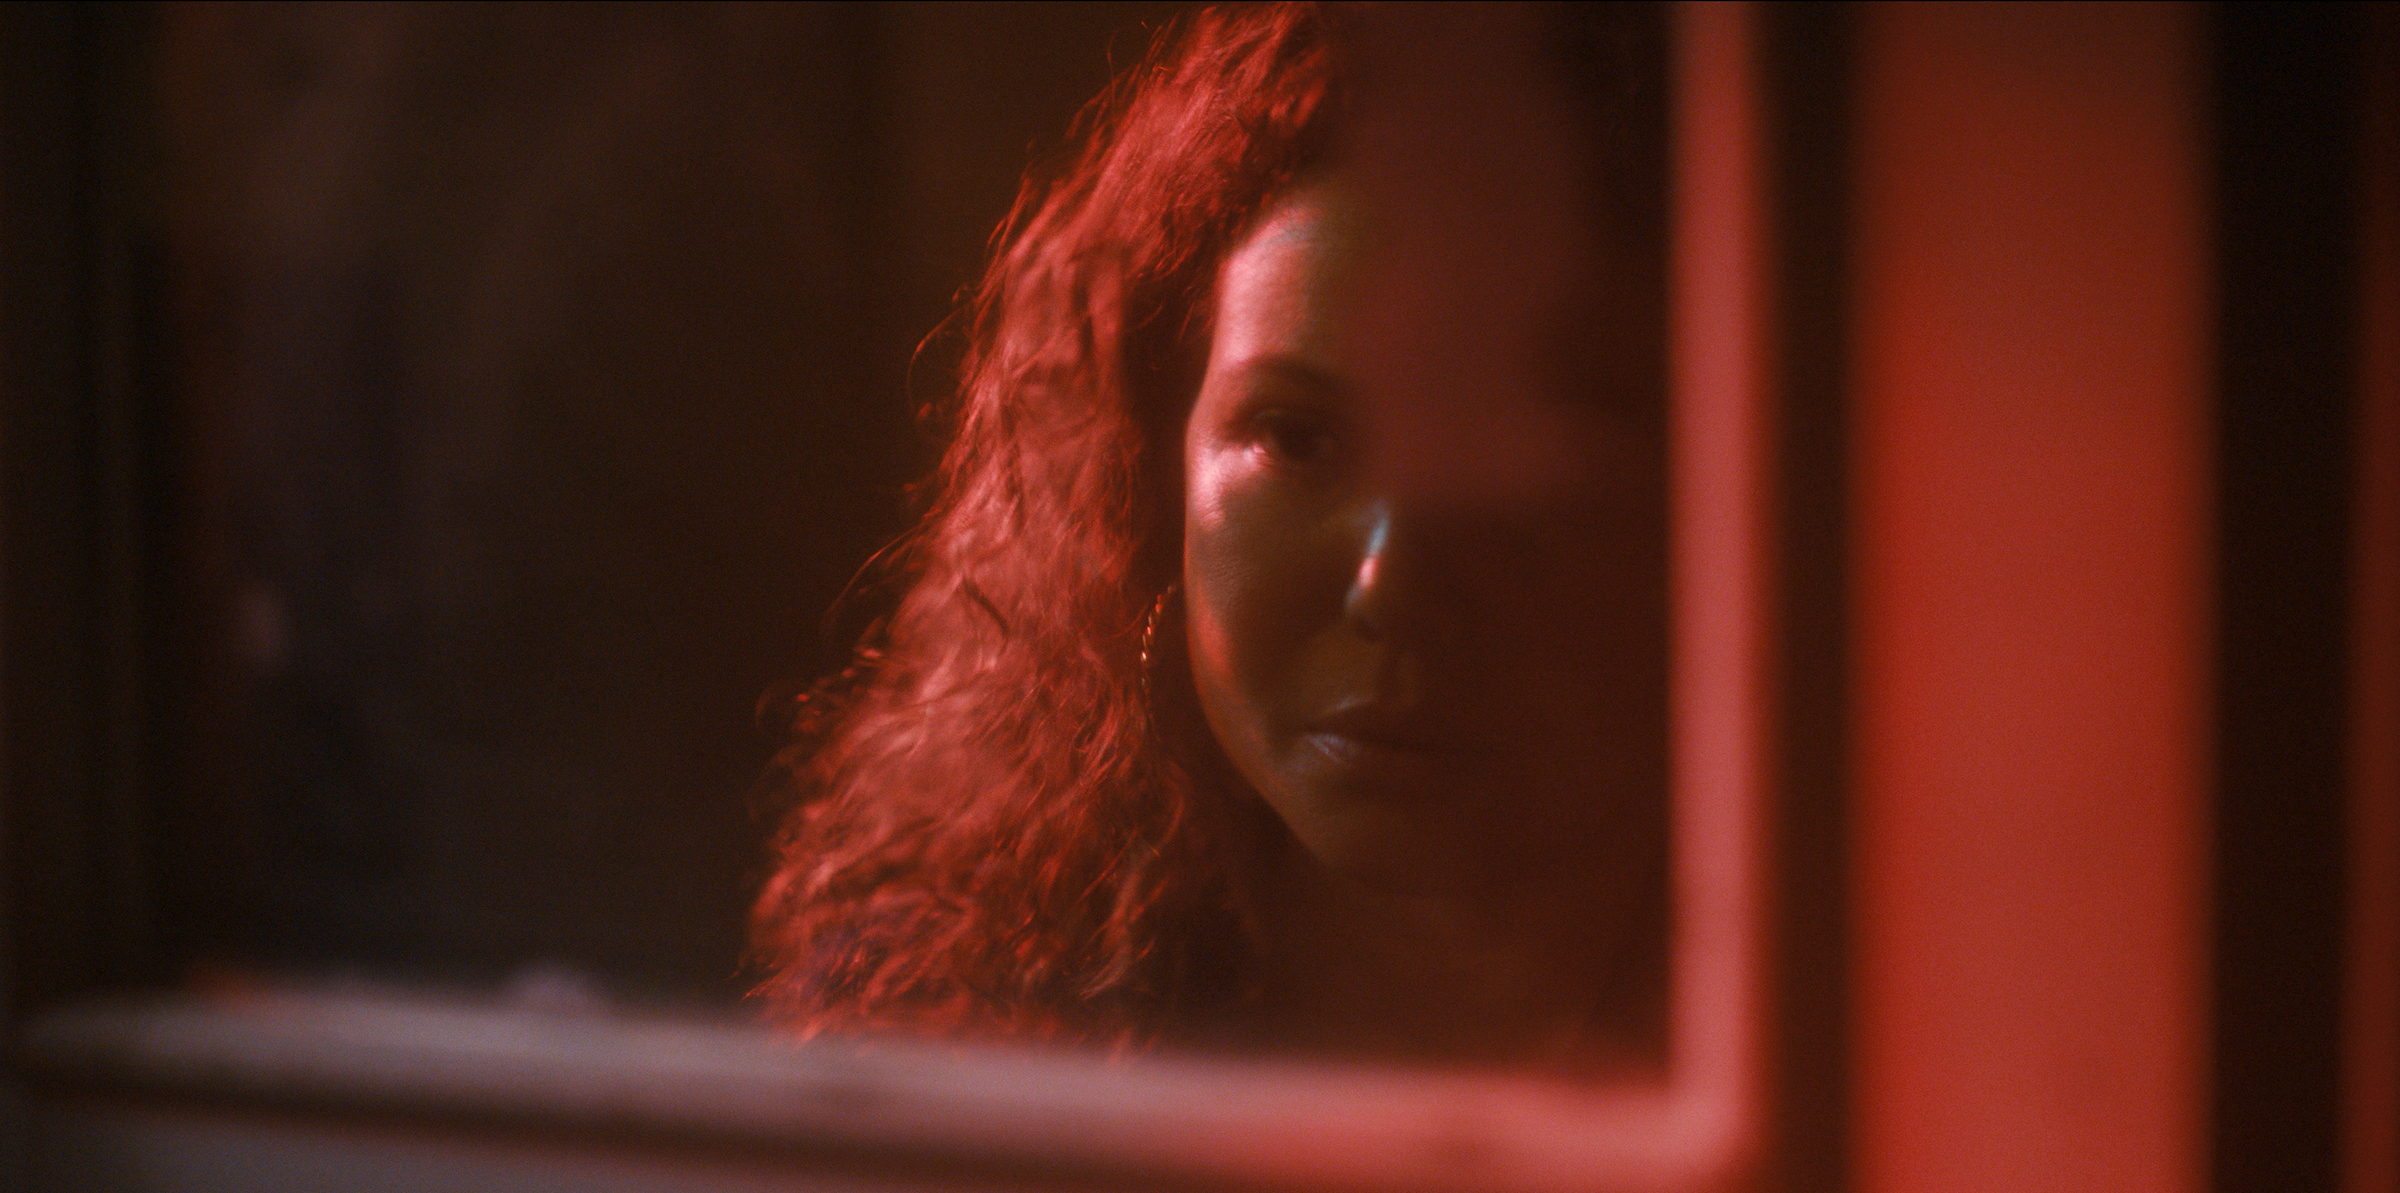 Dolores Roach (Justina Machado) contemplates her reflection in the mirror. (Courtesy of Prime Video)